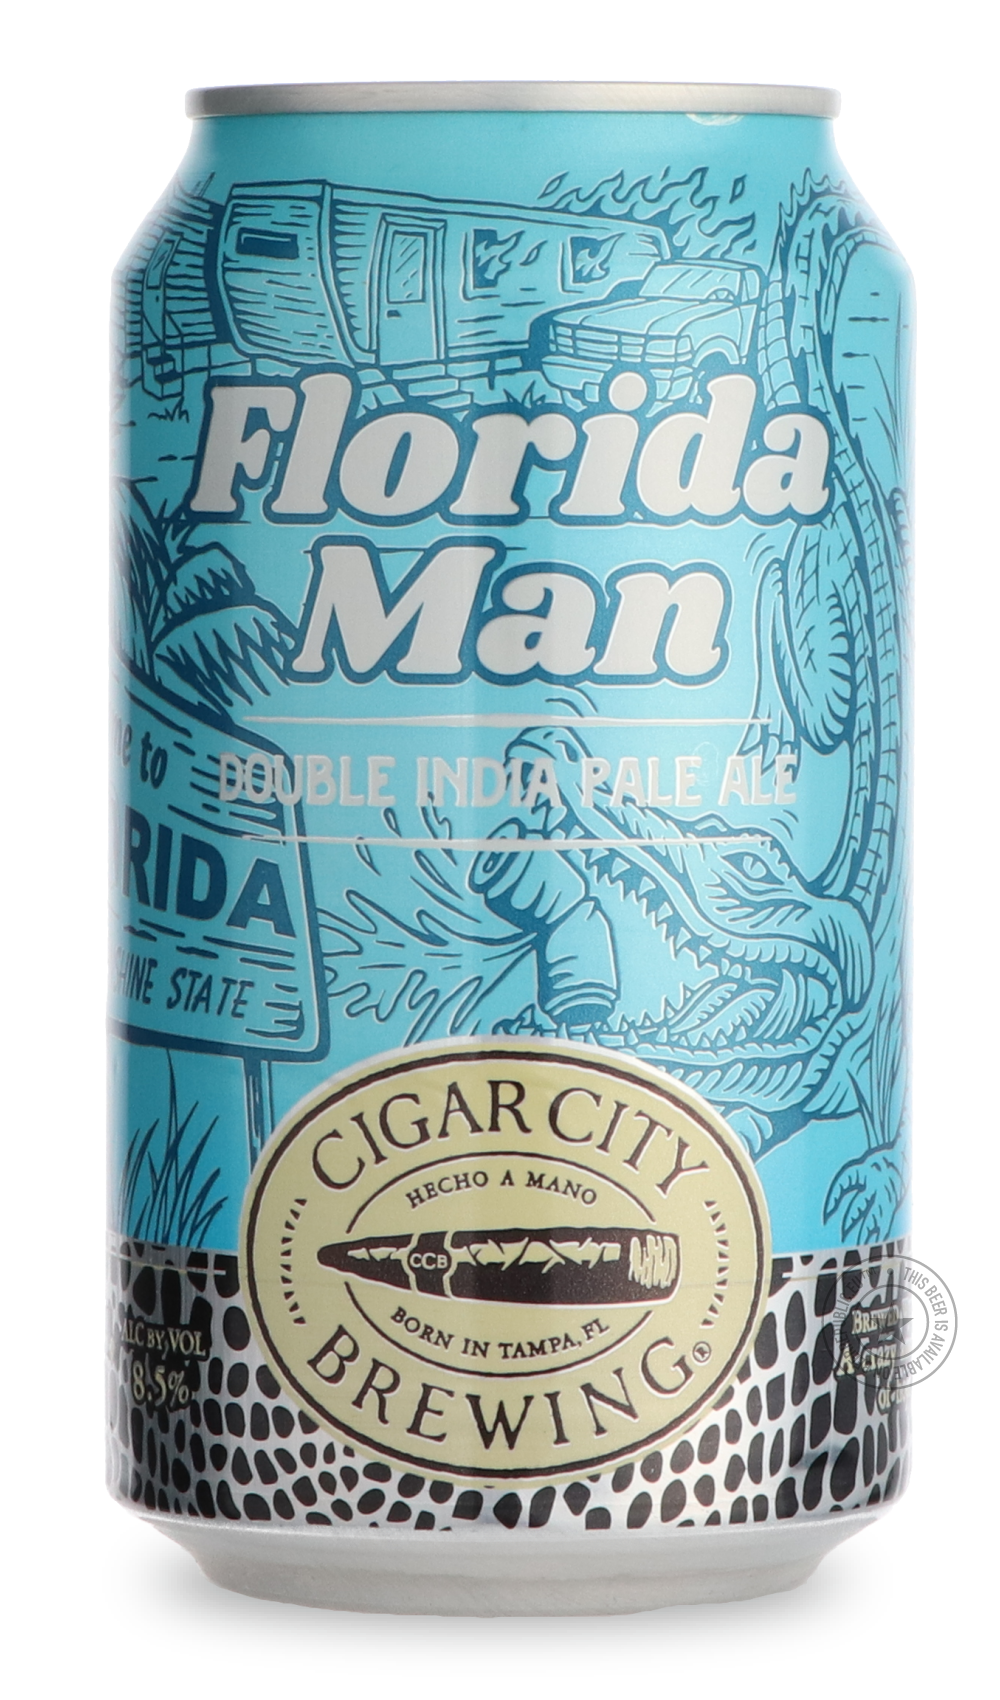 -Cigar City- Florida Man™-IPA- Only @ Beer Republic - The best online beer store for American & Canadian craft beer - Buy beer online from the USA and Canada - Bier online kopen - Amerikaans bier kopen - Craft beer store - Craft beer kopen - Amerikanisch bier kaufen - Bier online kaufen - Acheter biere online - IPA - Stout - Porter - New England IPA - Hazy IPA - Imperial Stout - Barrel Aged - Barrel Aged Imperial Stout - Brown - Dark beer - Blond - Blonde - Pilsner - Lager - Wheat - Weizen - Amber - Barley 